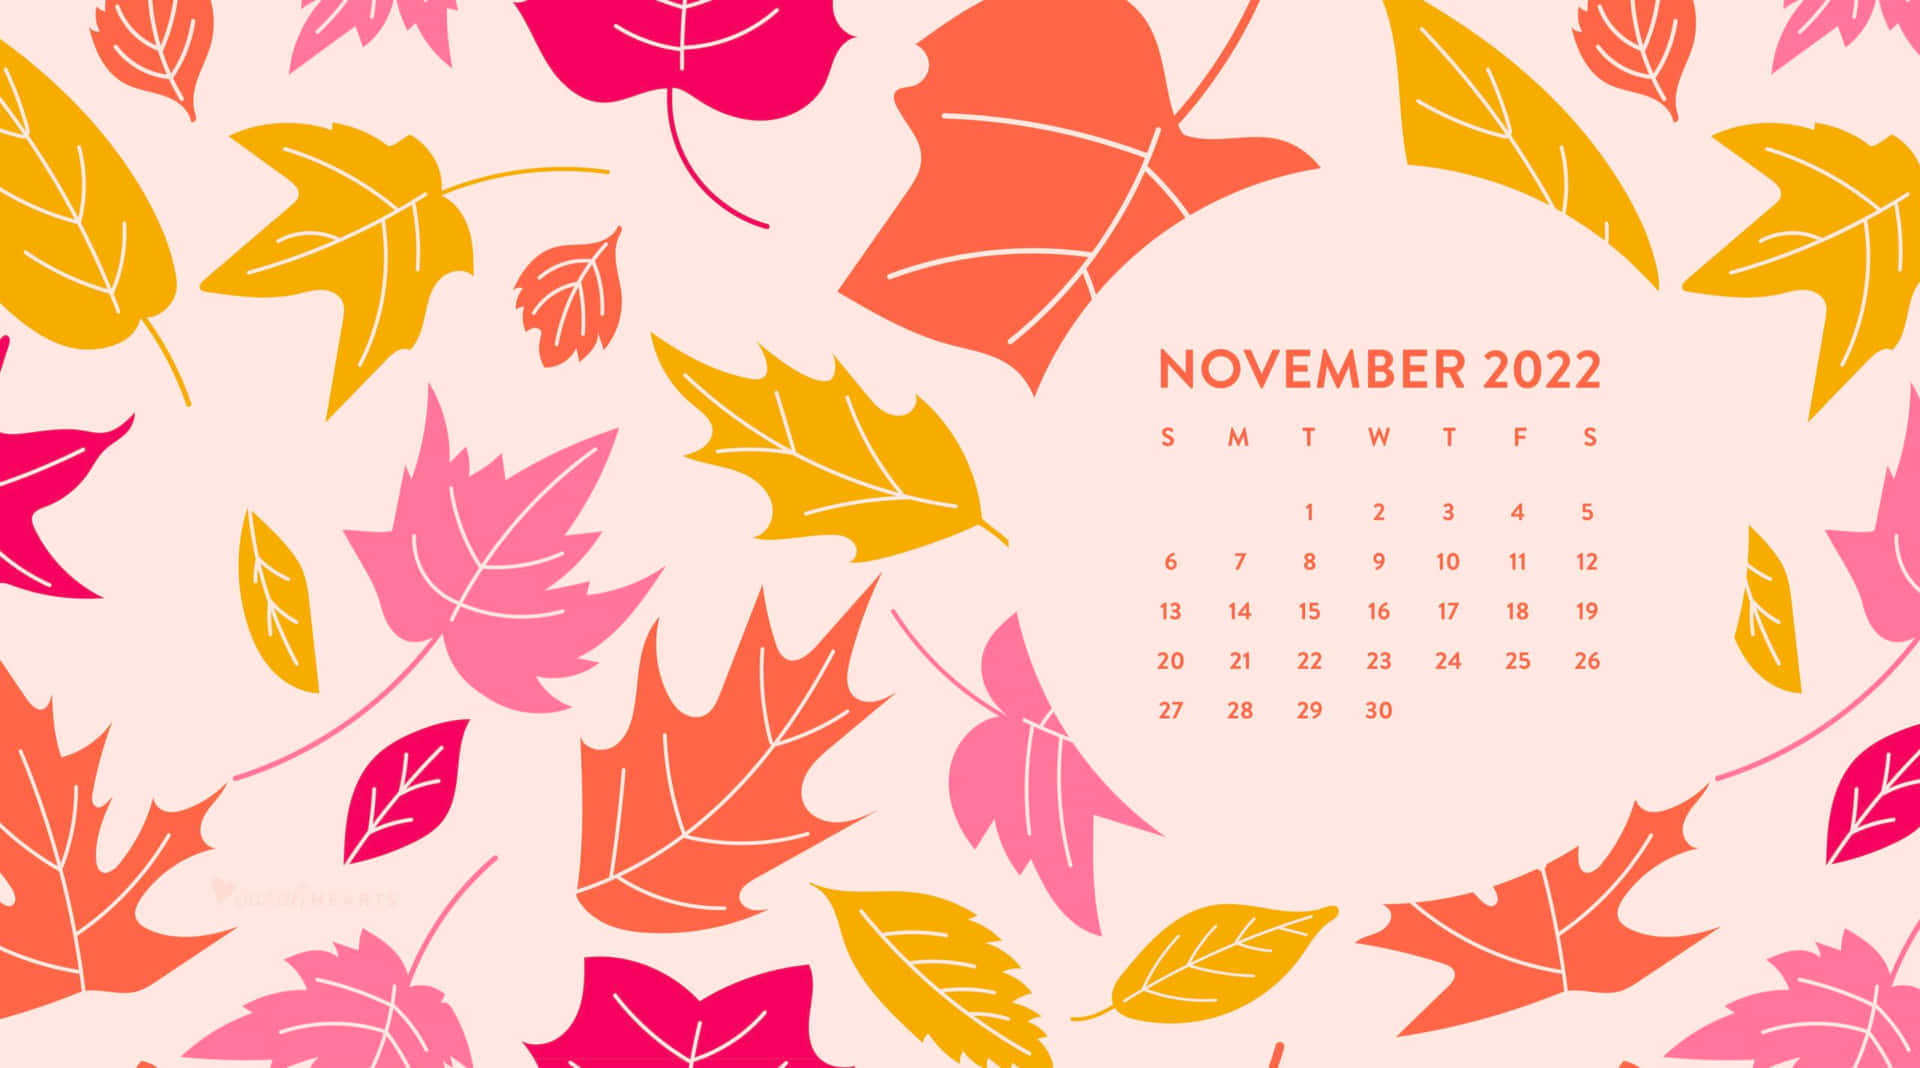 Celebrate the Month of November